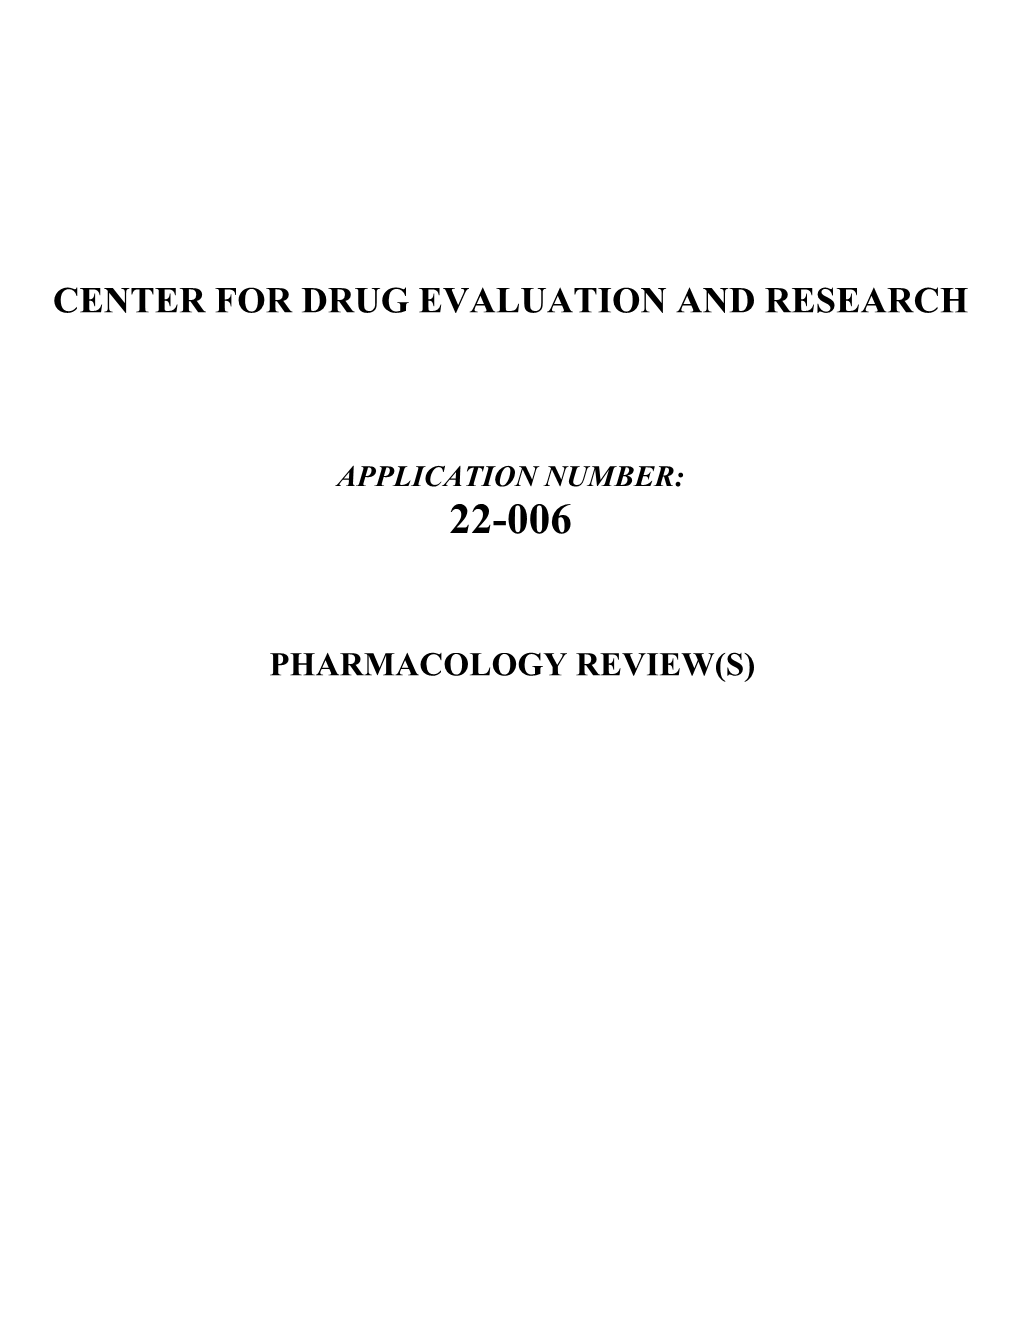 Center for Drug Evaluation and Research